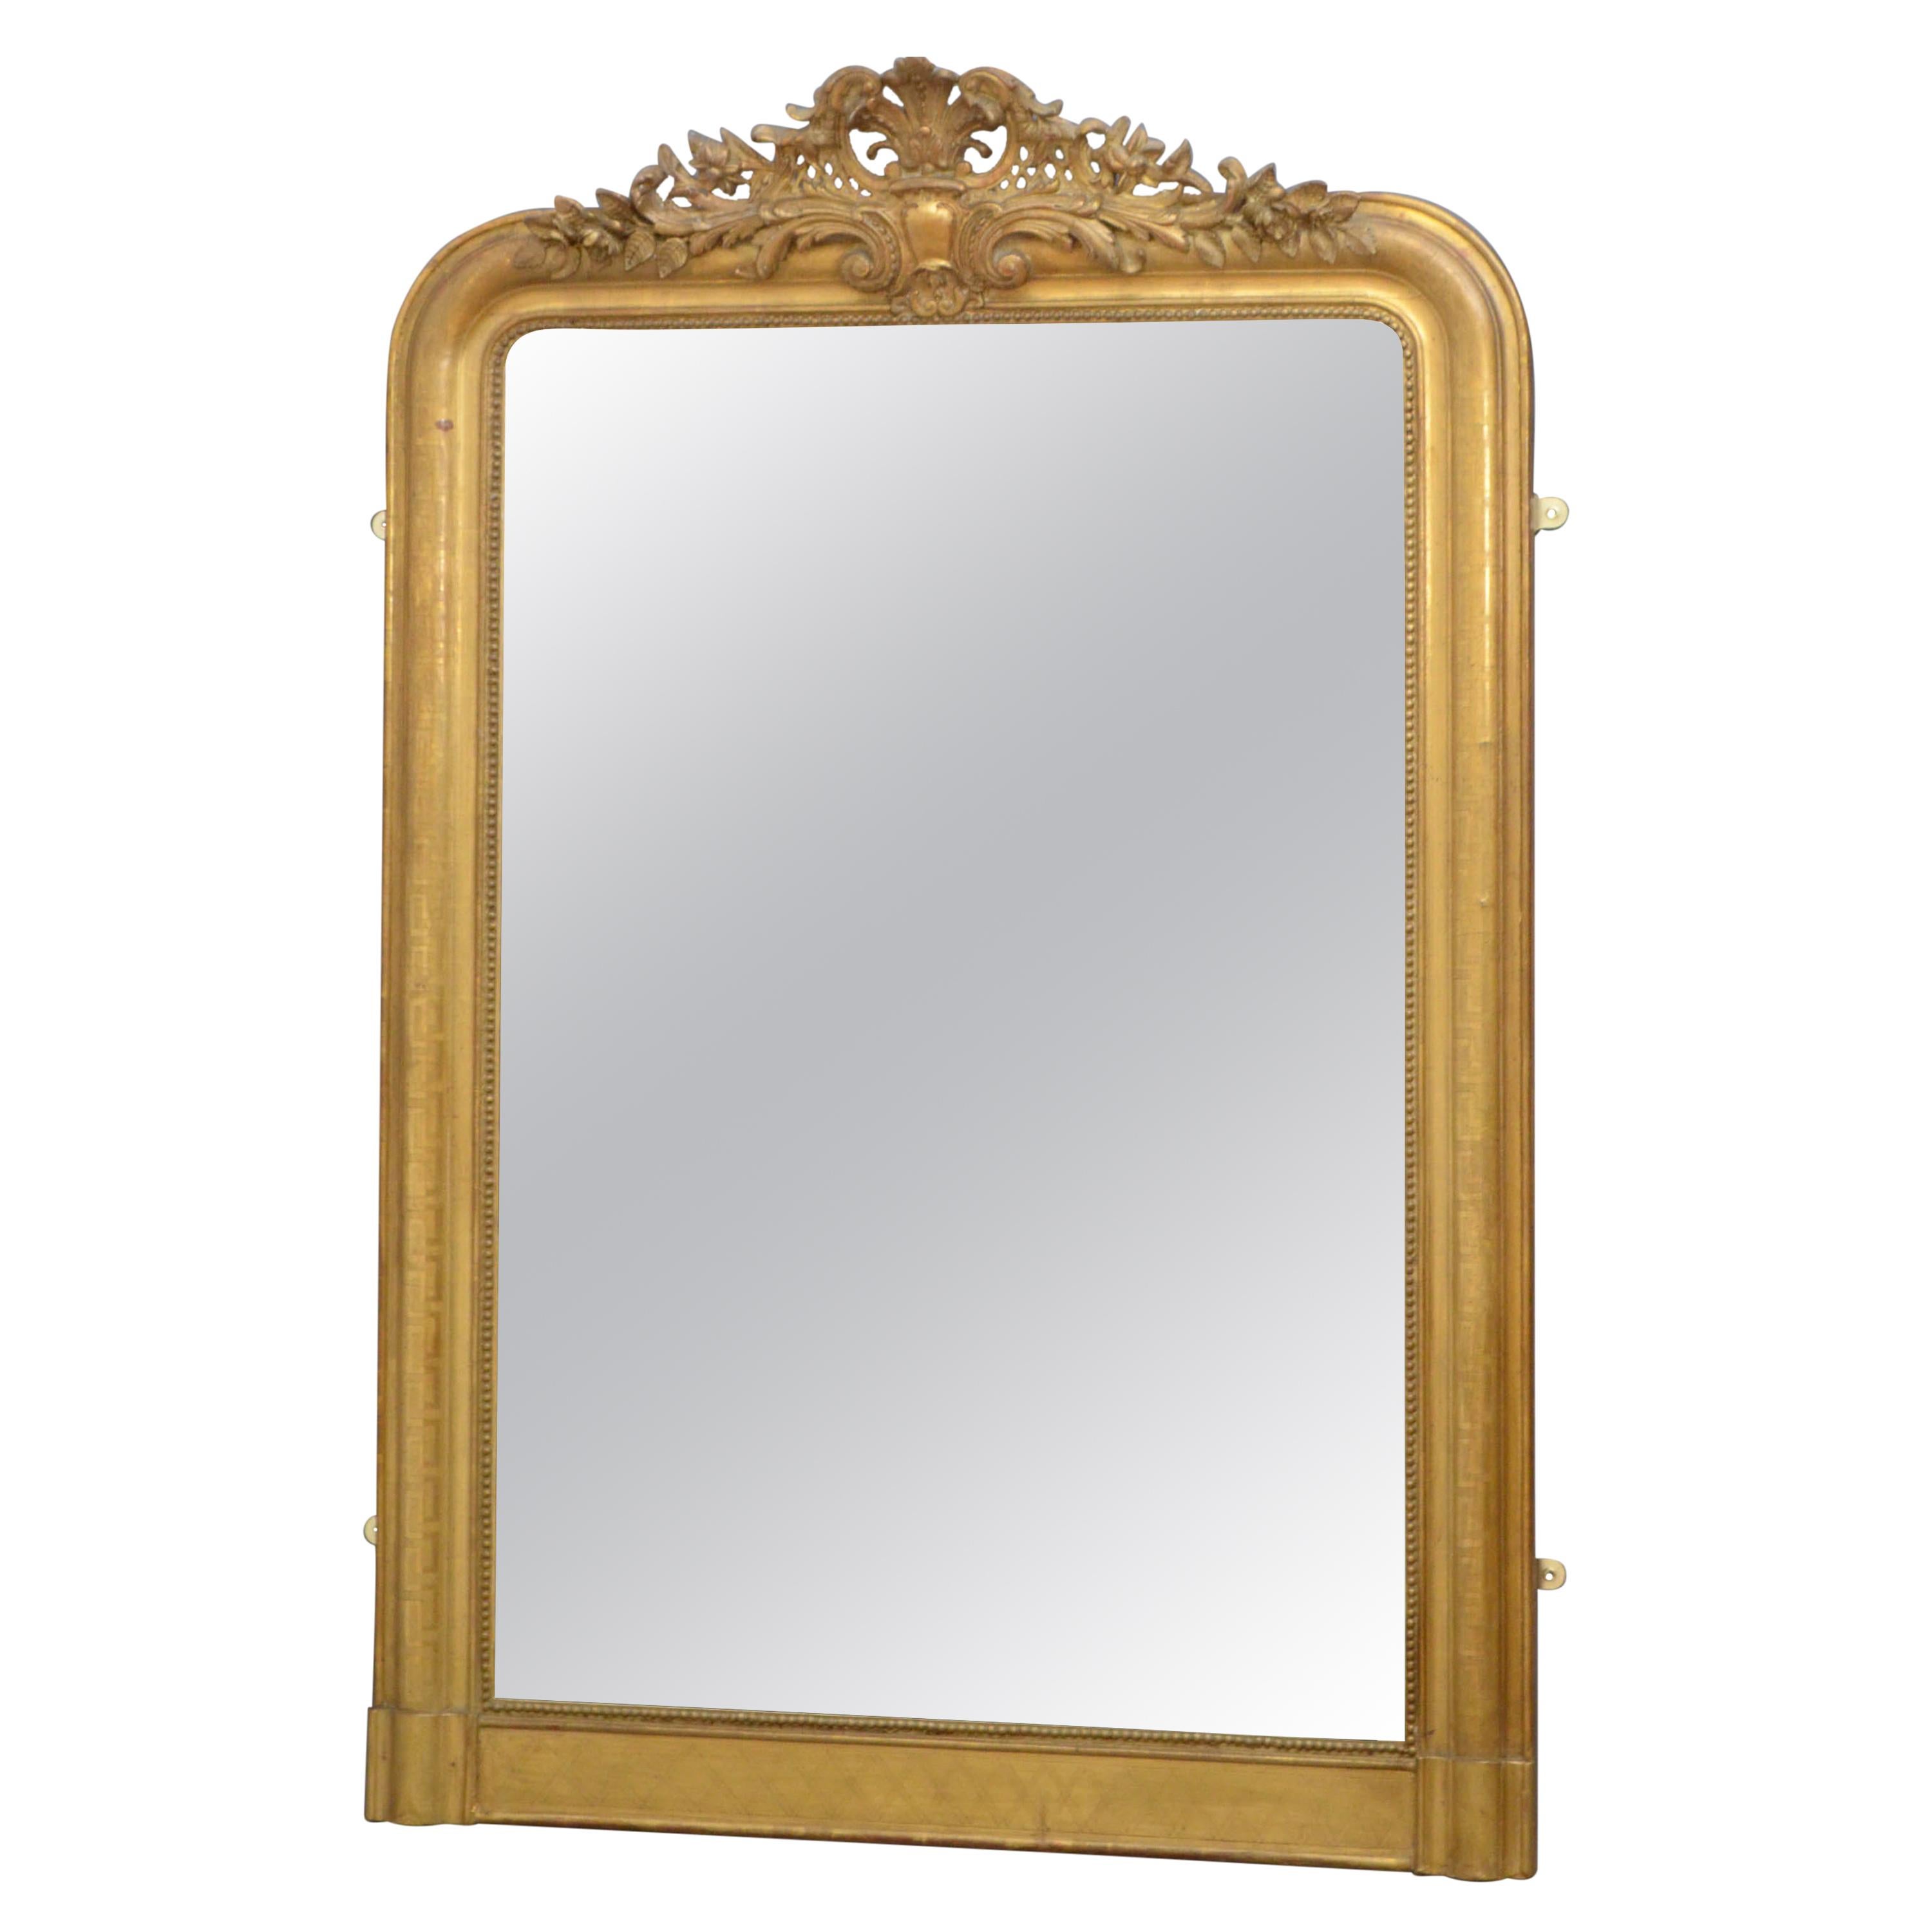 Attractive French Giltwood Mirror